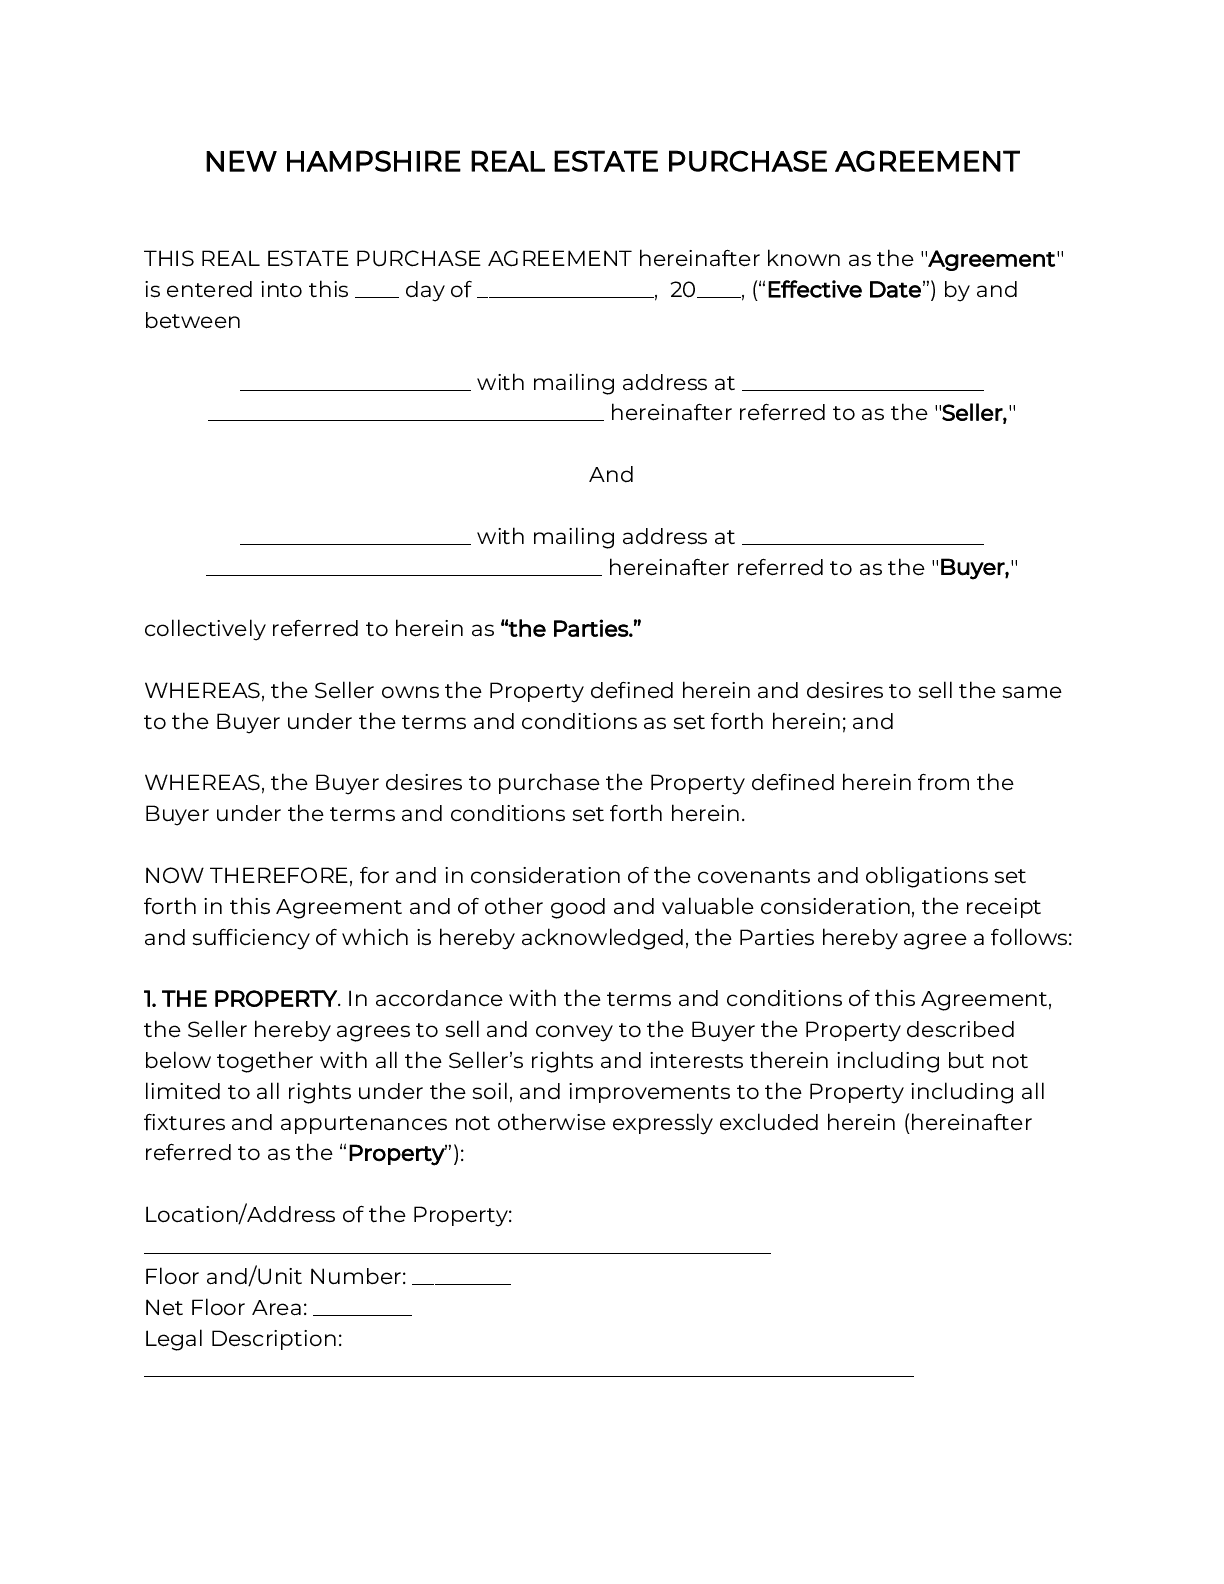 official-new-hampshire-residential-purchase-agreement-2020